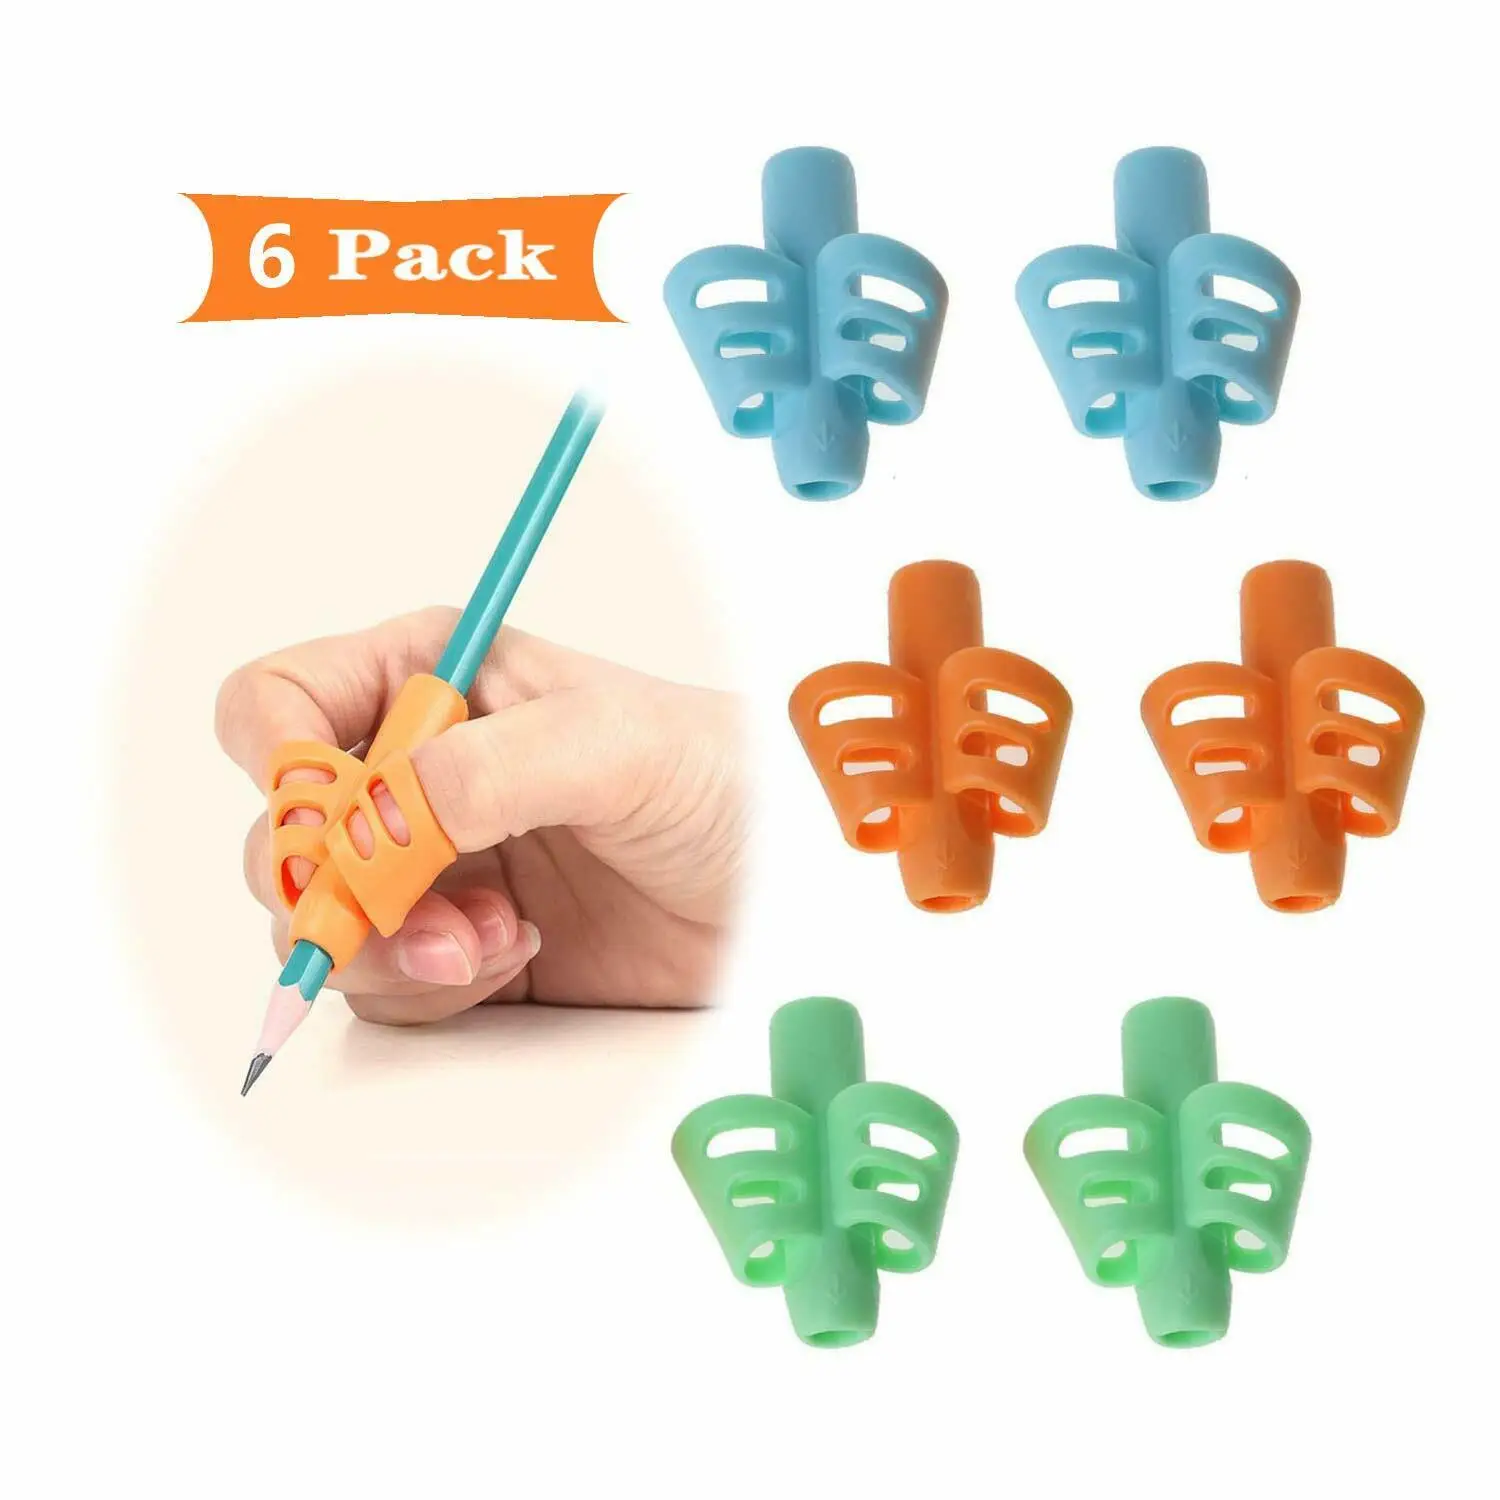 3 × Pencil Pen Handwriting Aid Grip Right Left Handed Soft Set Silica Gel Tool